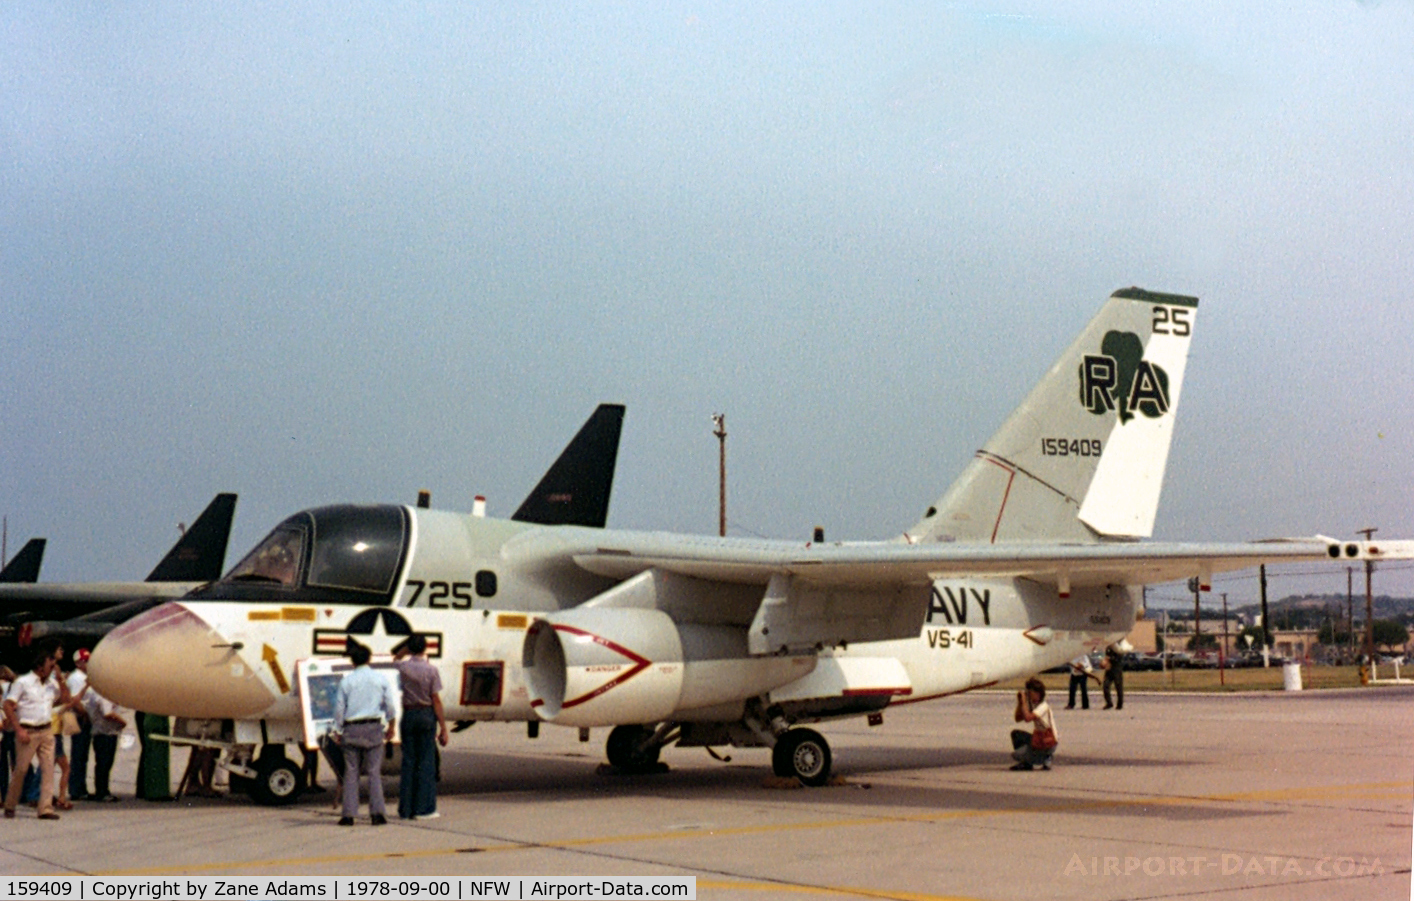 159409, Lockheed S-3B Viking C/N 394A-1045, At Carswell Air Force Base 1978 Airshow - This aircraft has been reported at AMARC